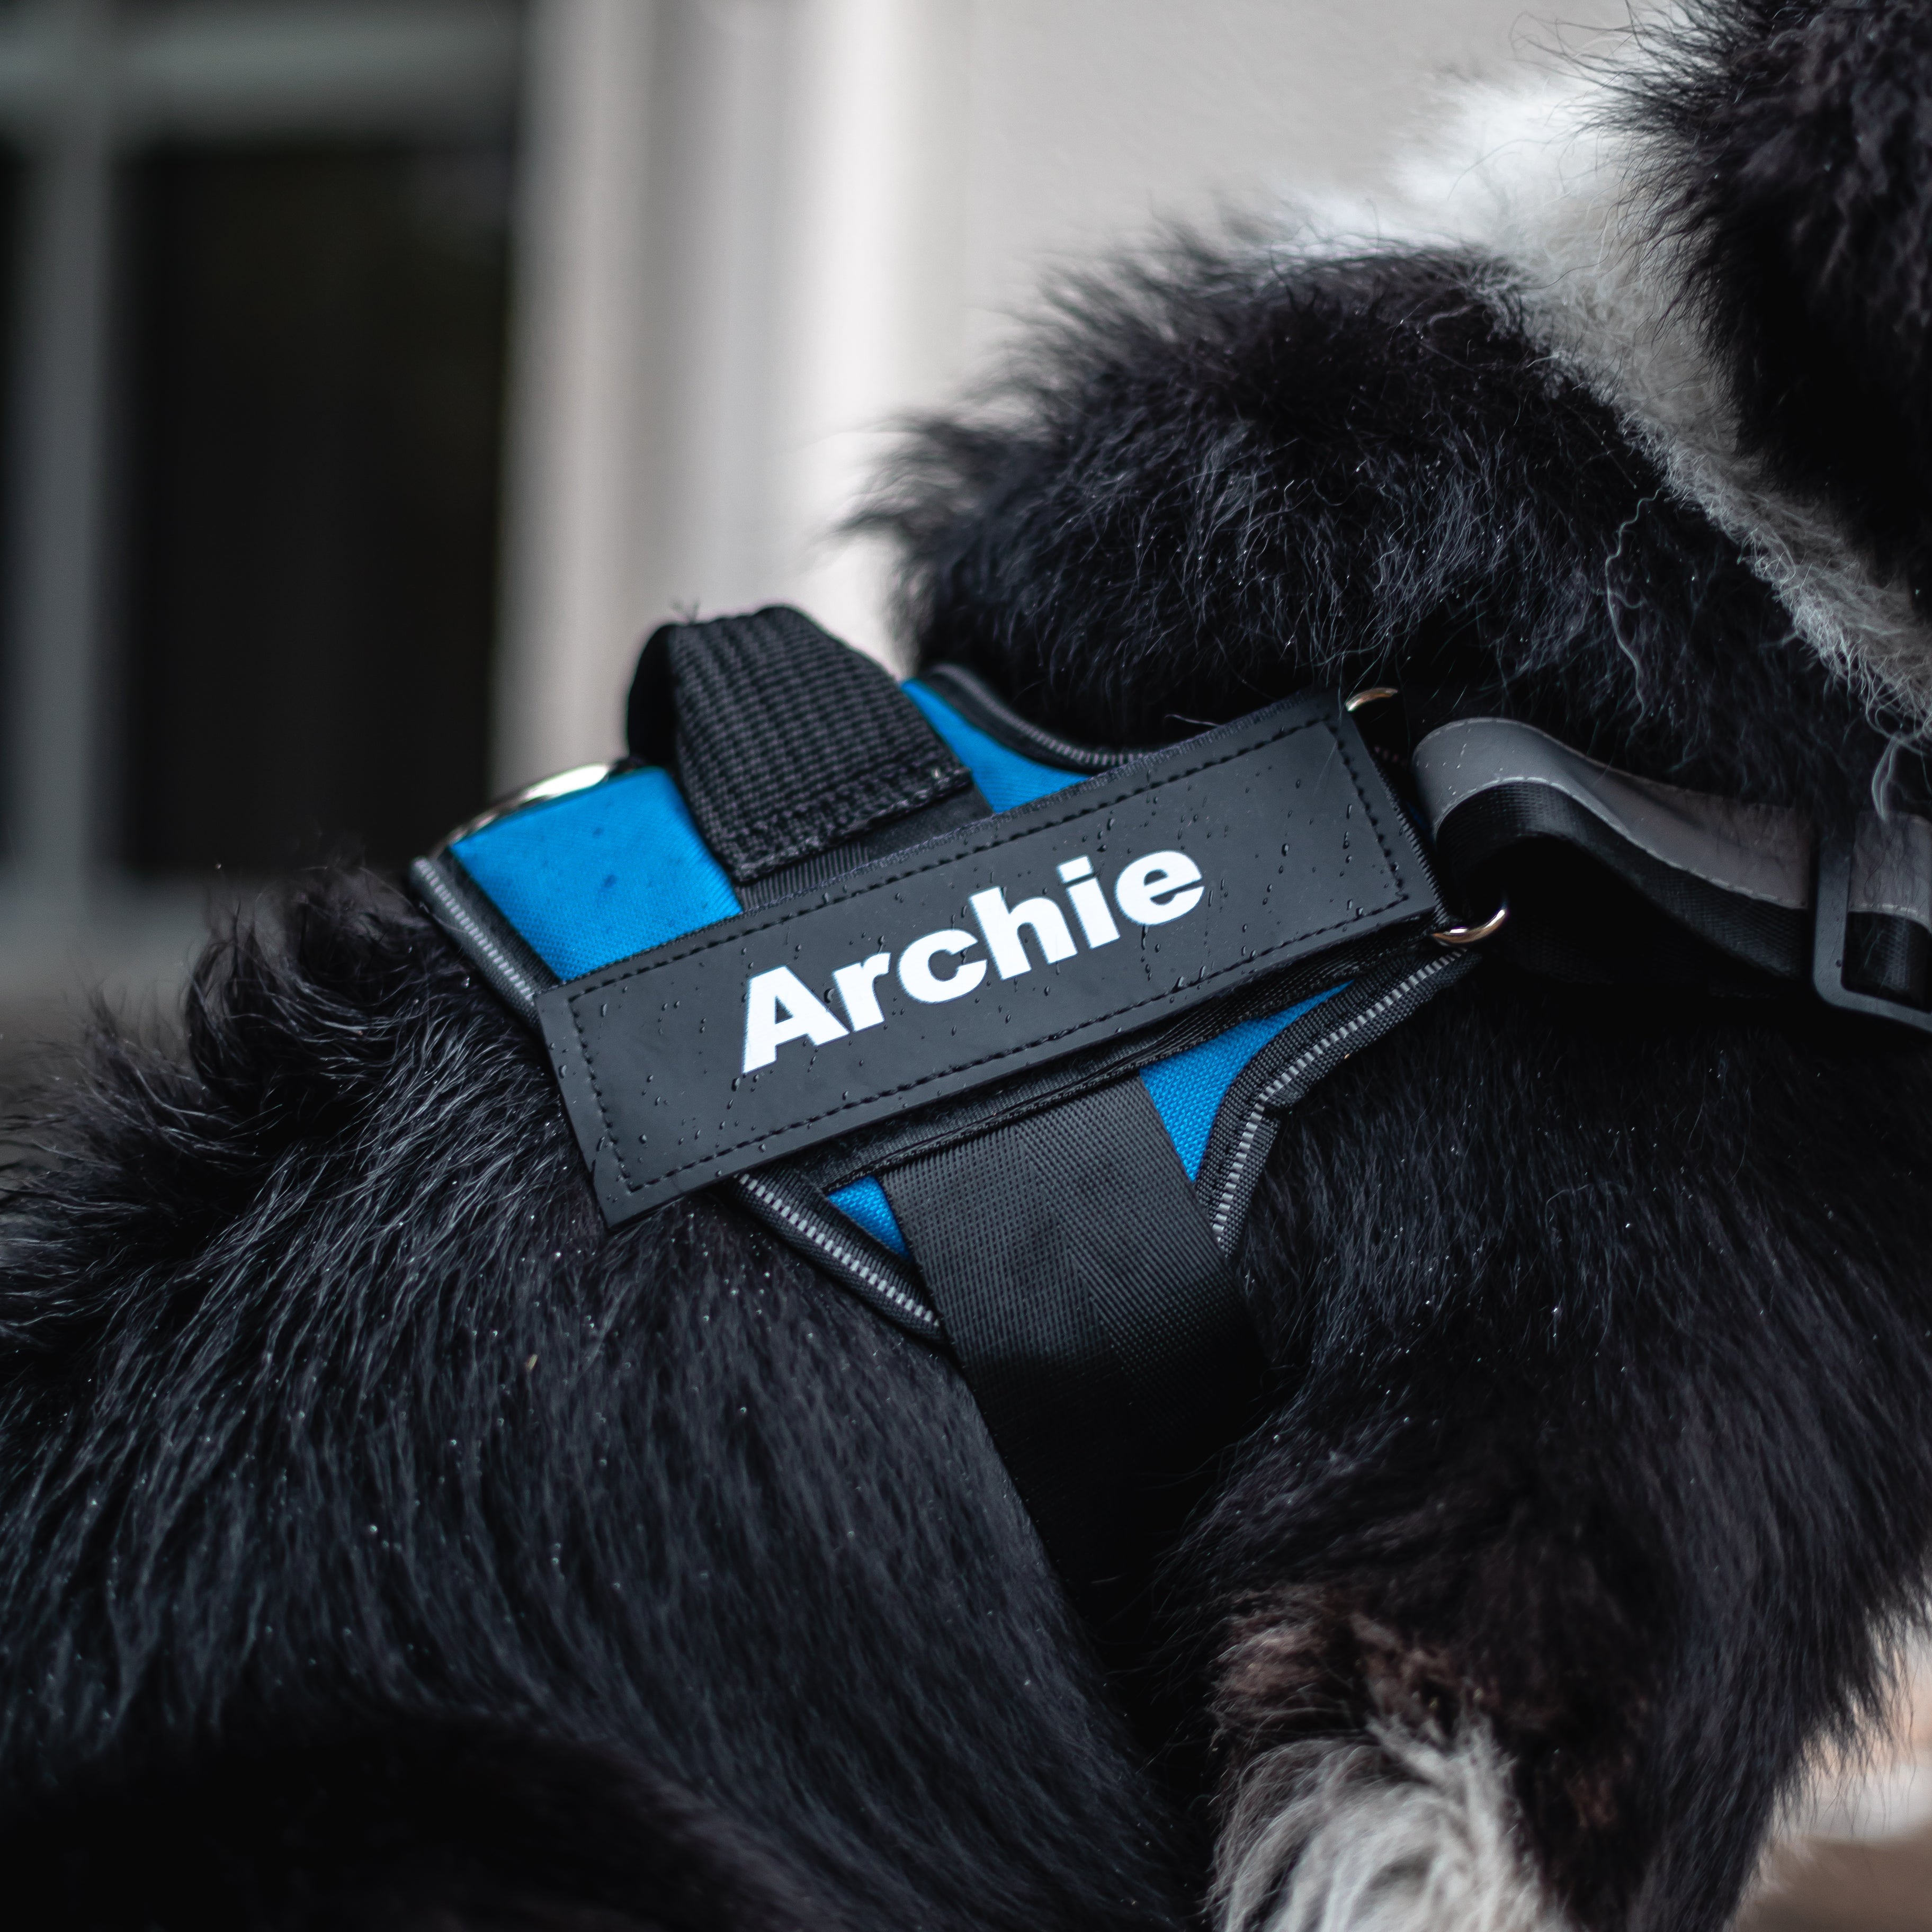 Personalised Dog Harness